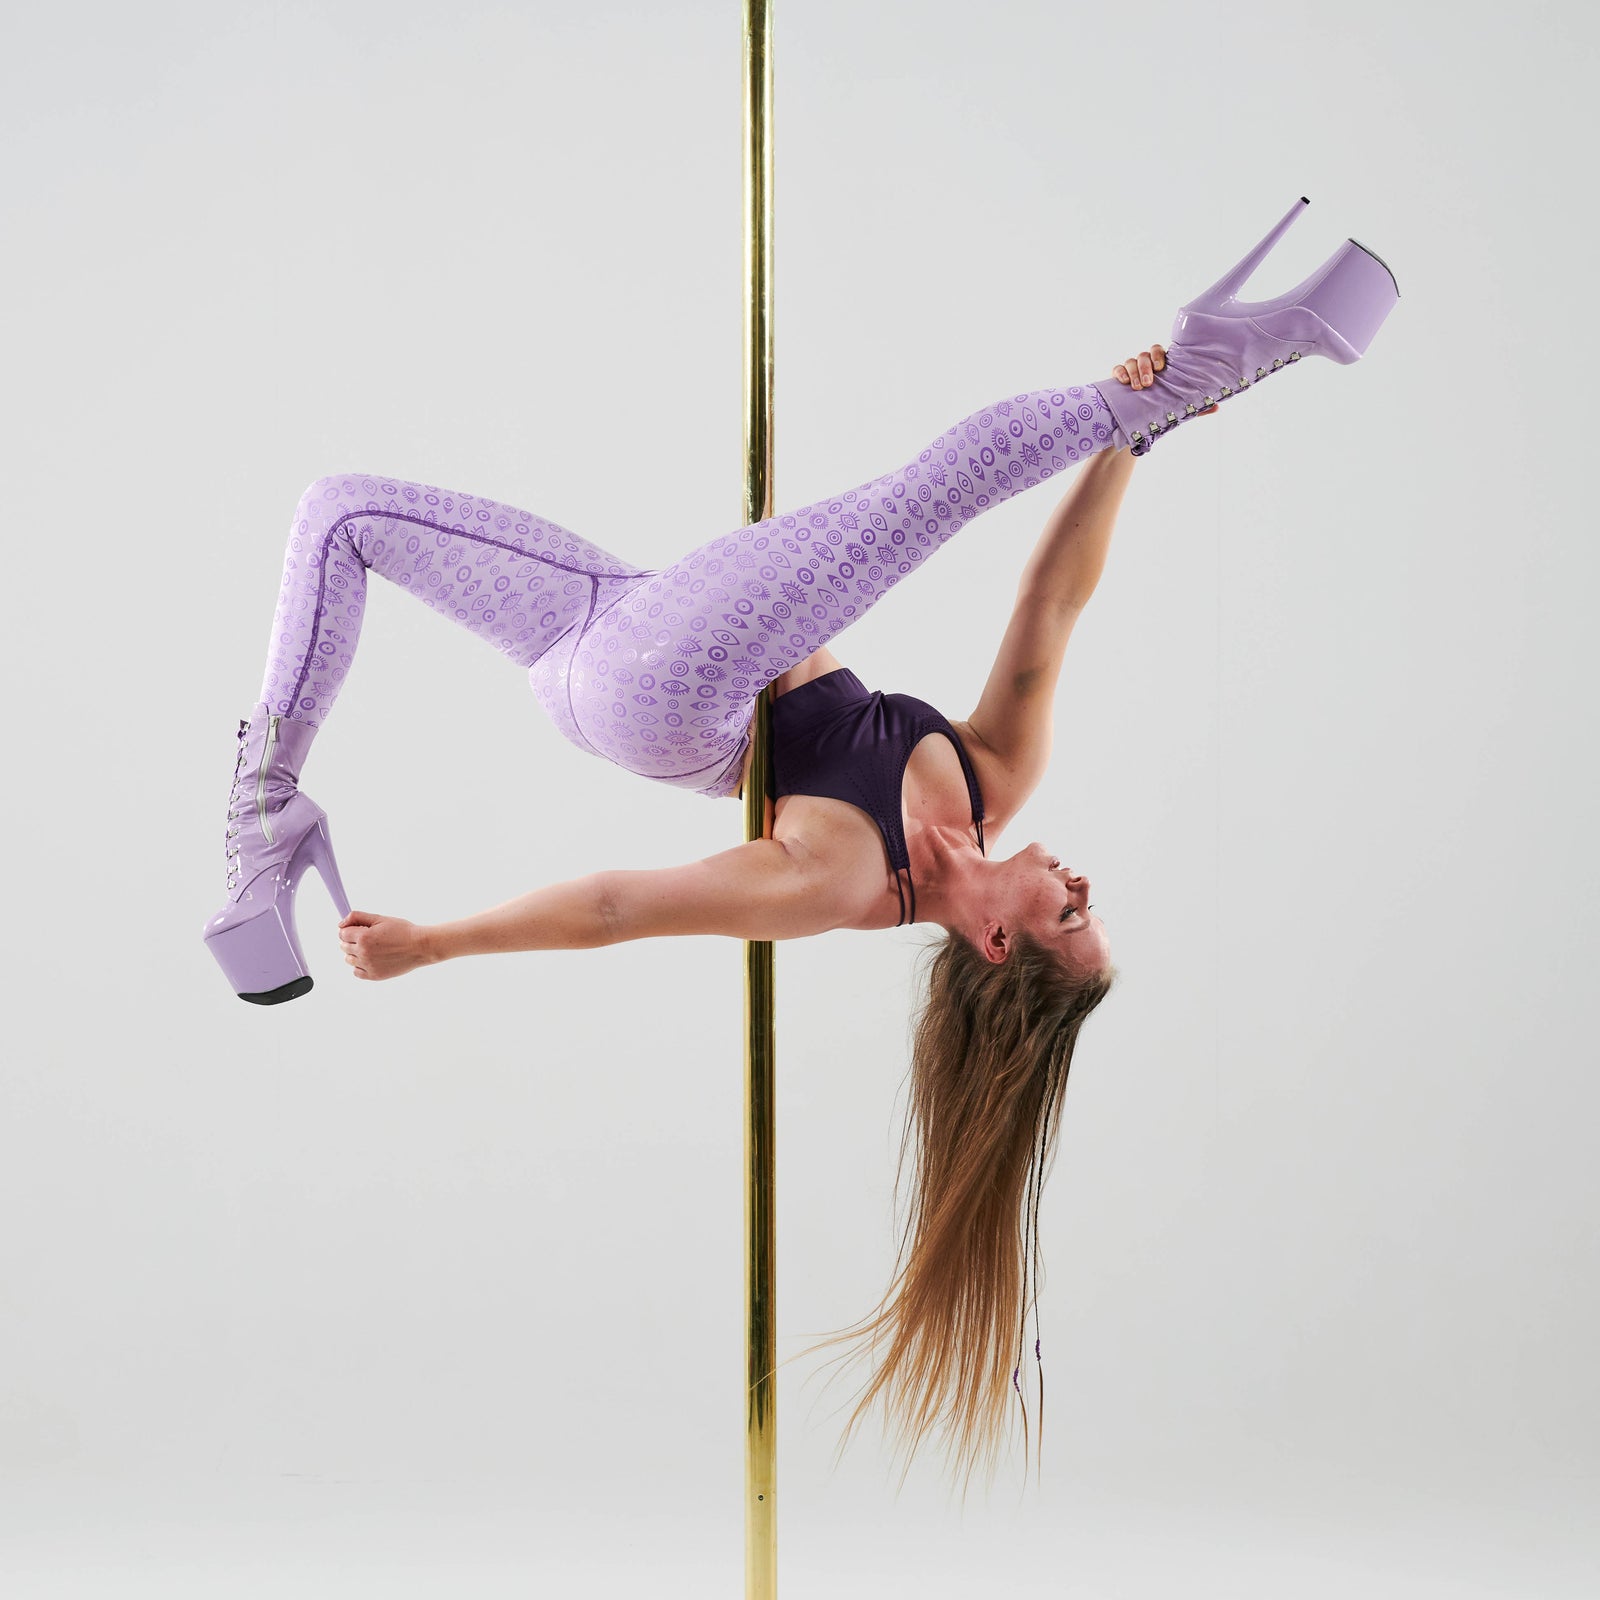 Aerial pole dancing accessories - THEPOLE